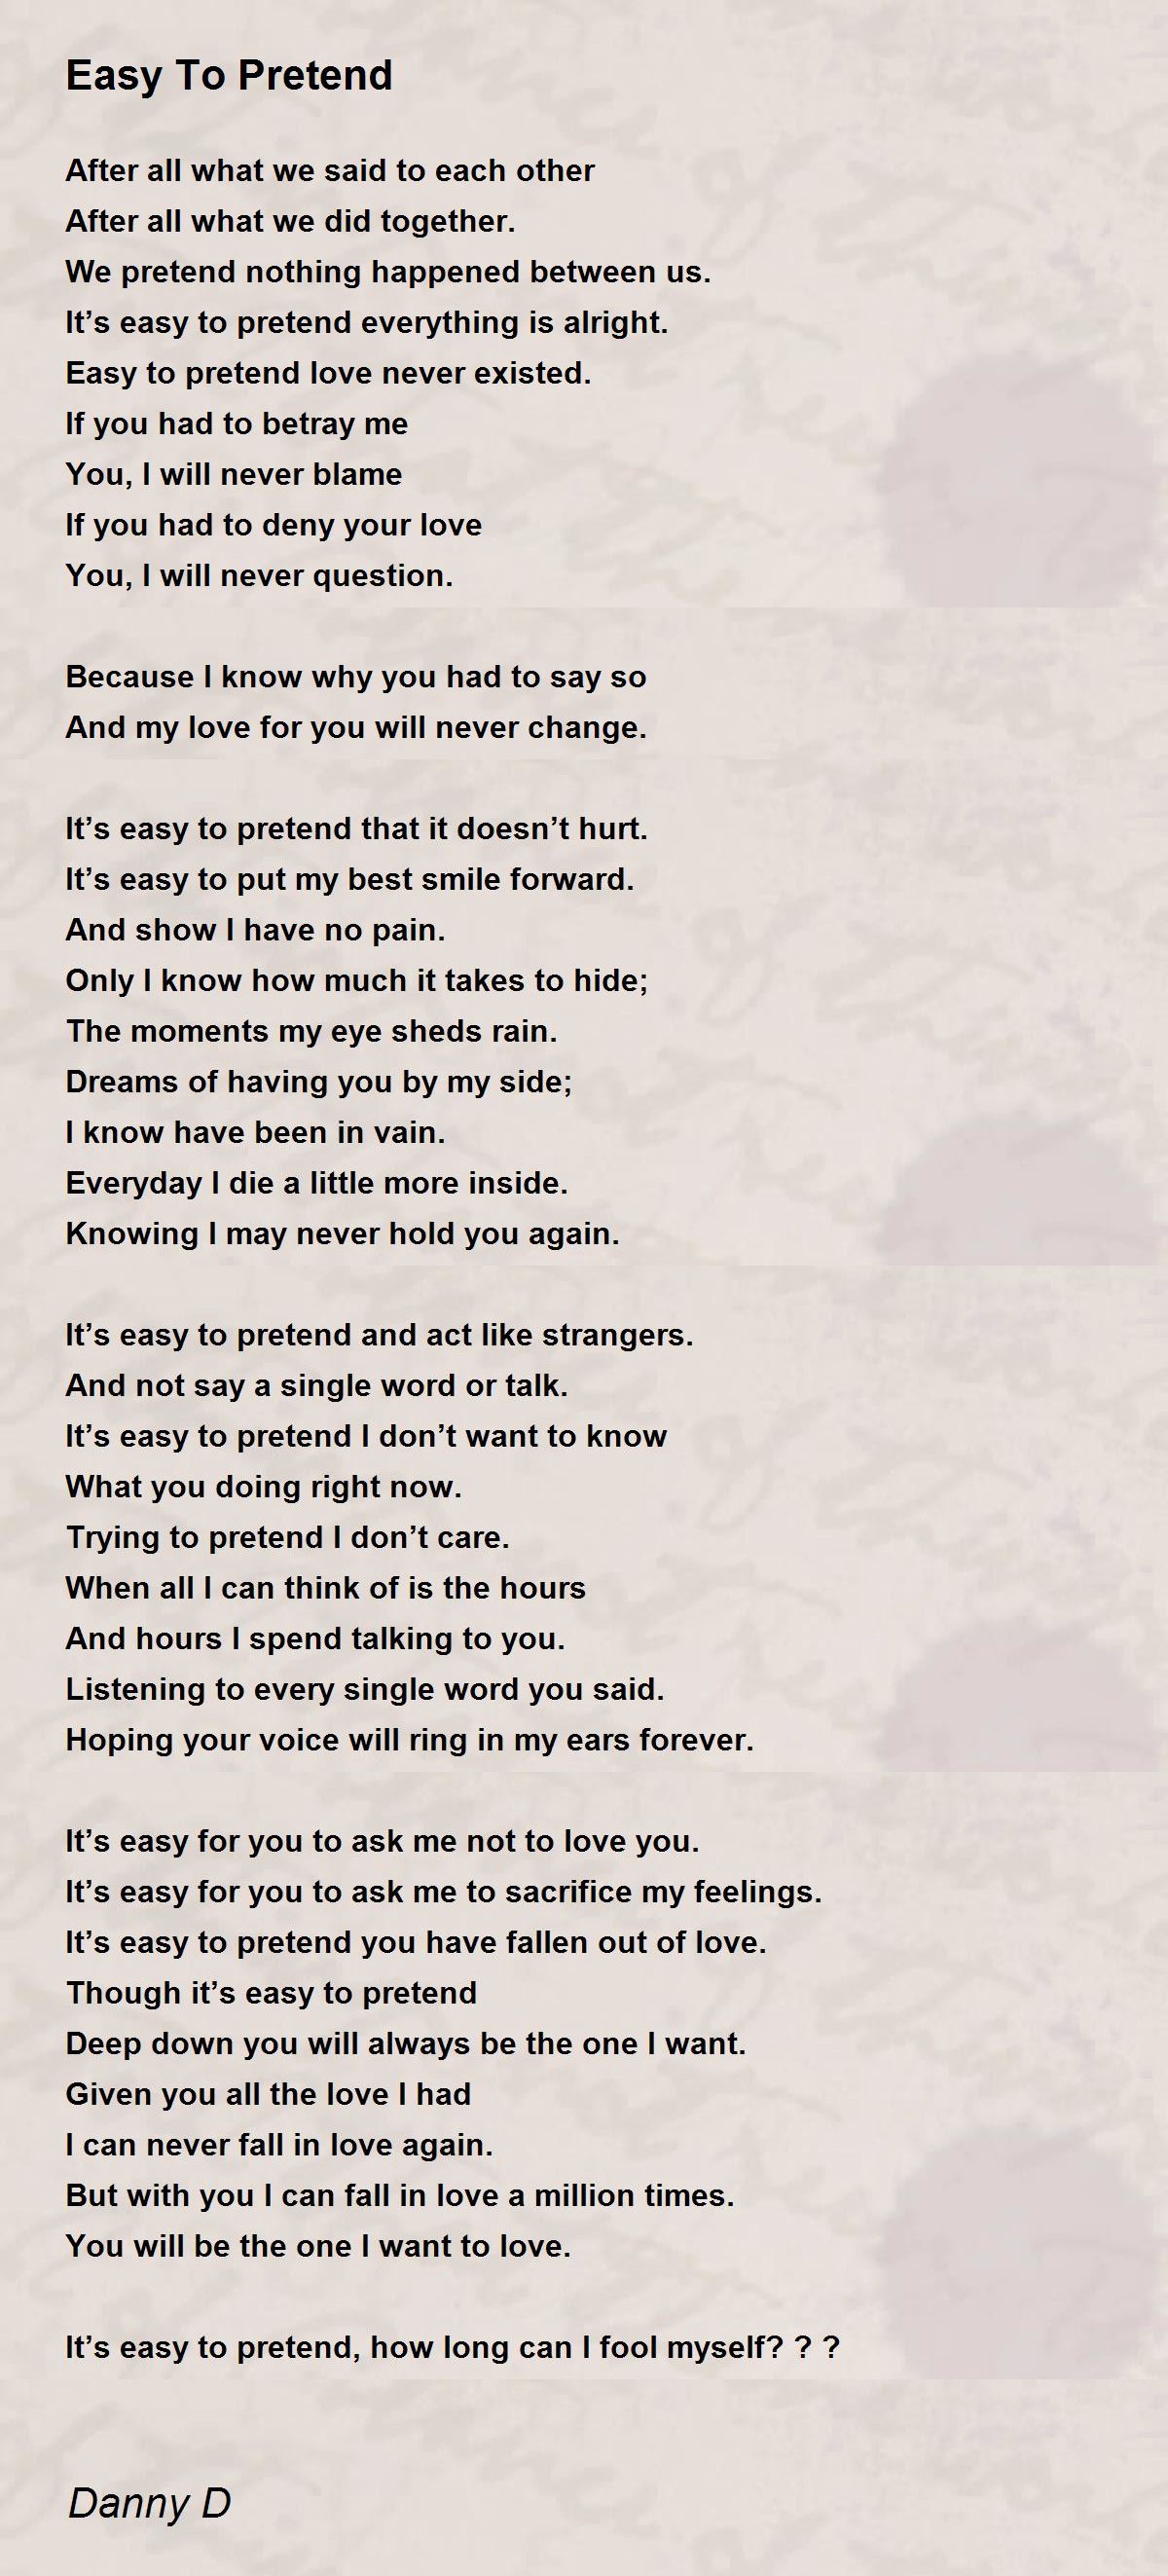 You Are The Sweetest Thing - You Are The Sweetest Thing Poem by Danny D